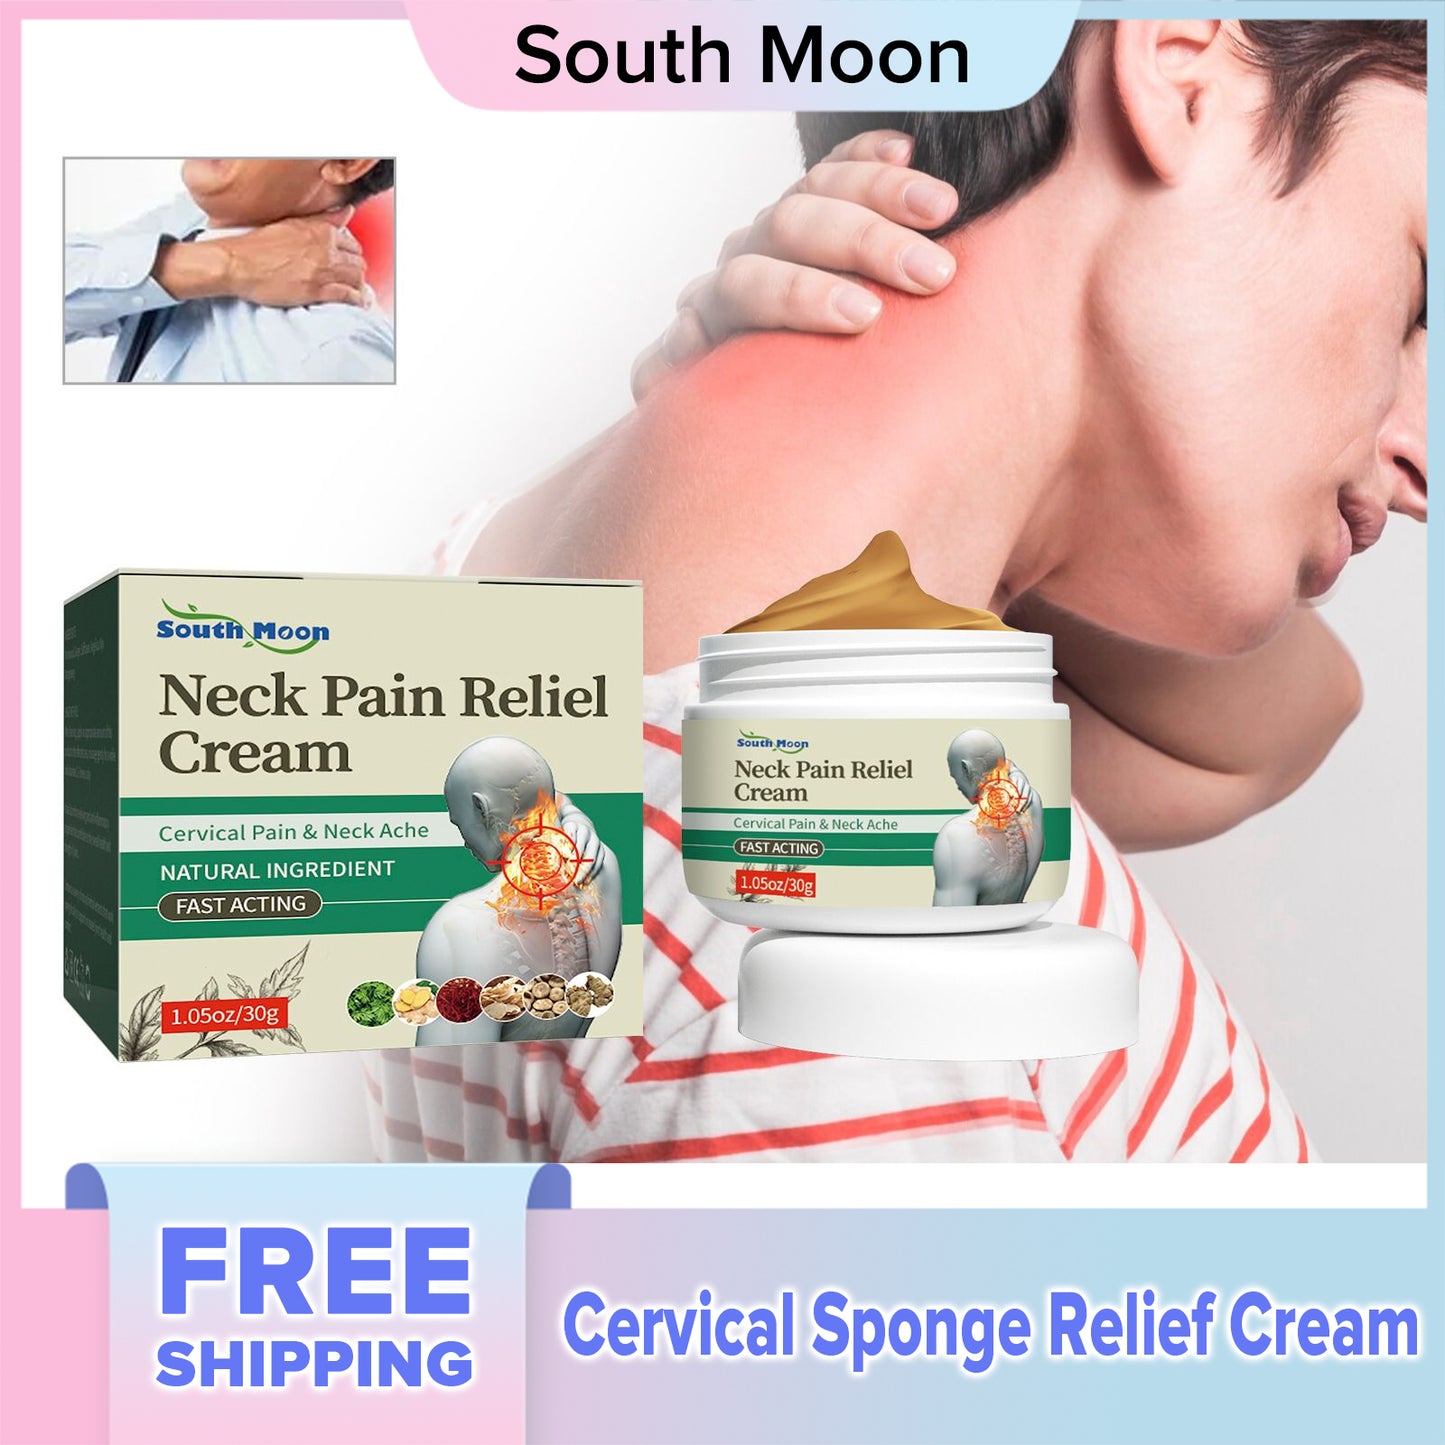 South Moon Cervical Sponge Relief Cream Relieving Lumbar Spine, Shoulder and Neck Strain, Pain, Relaxing Muscles and Activating Collateral Body Care Cream (30g)